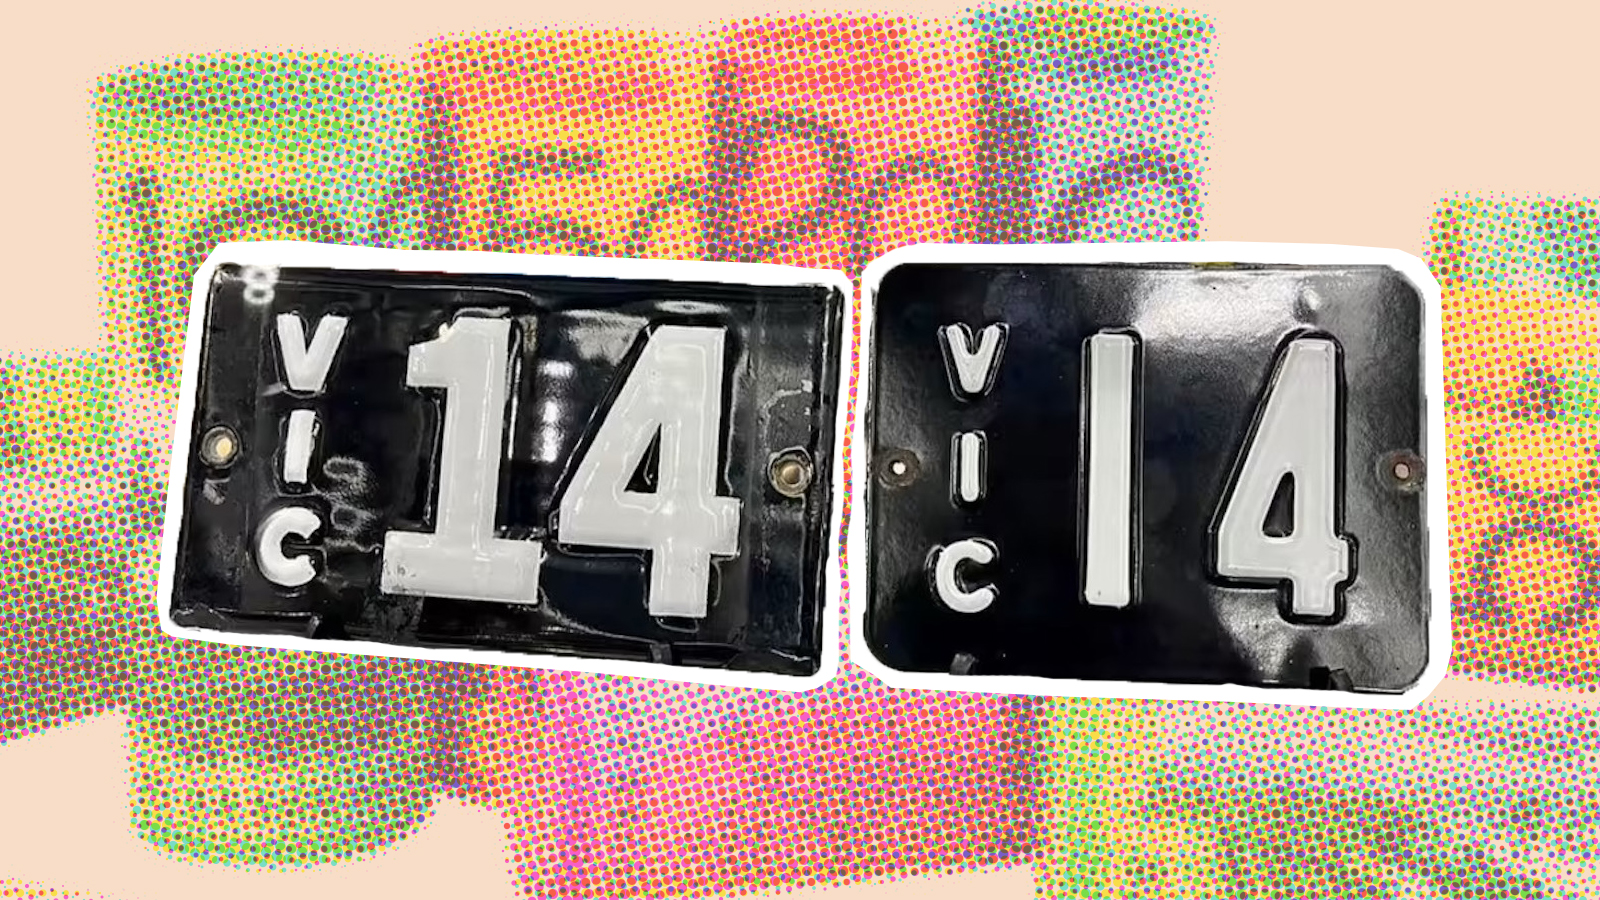 Australian Car Number Plate Sells For A Record $2.2 Million